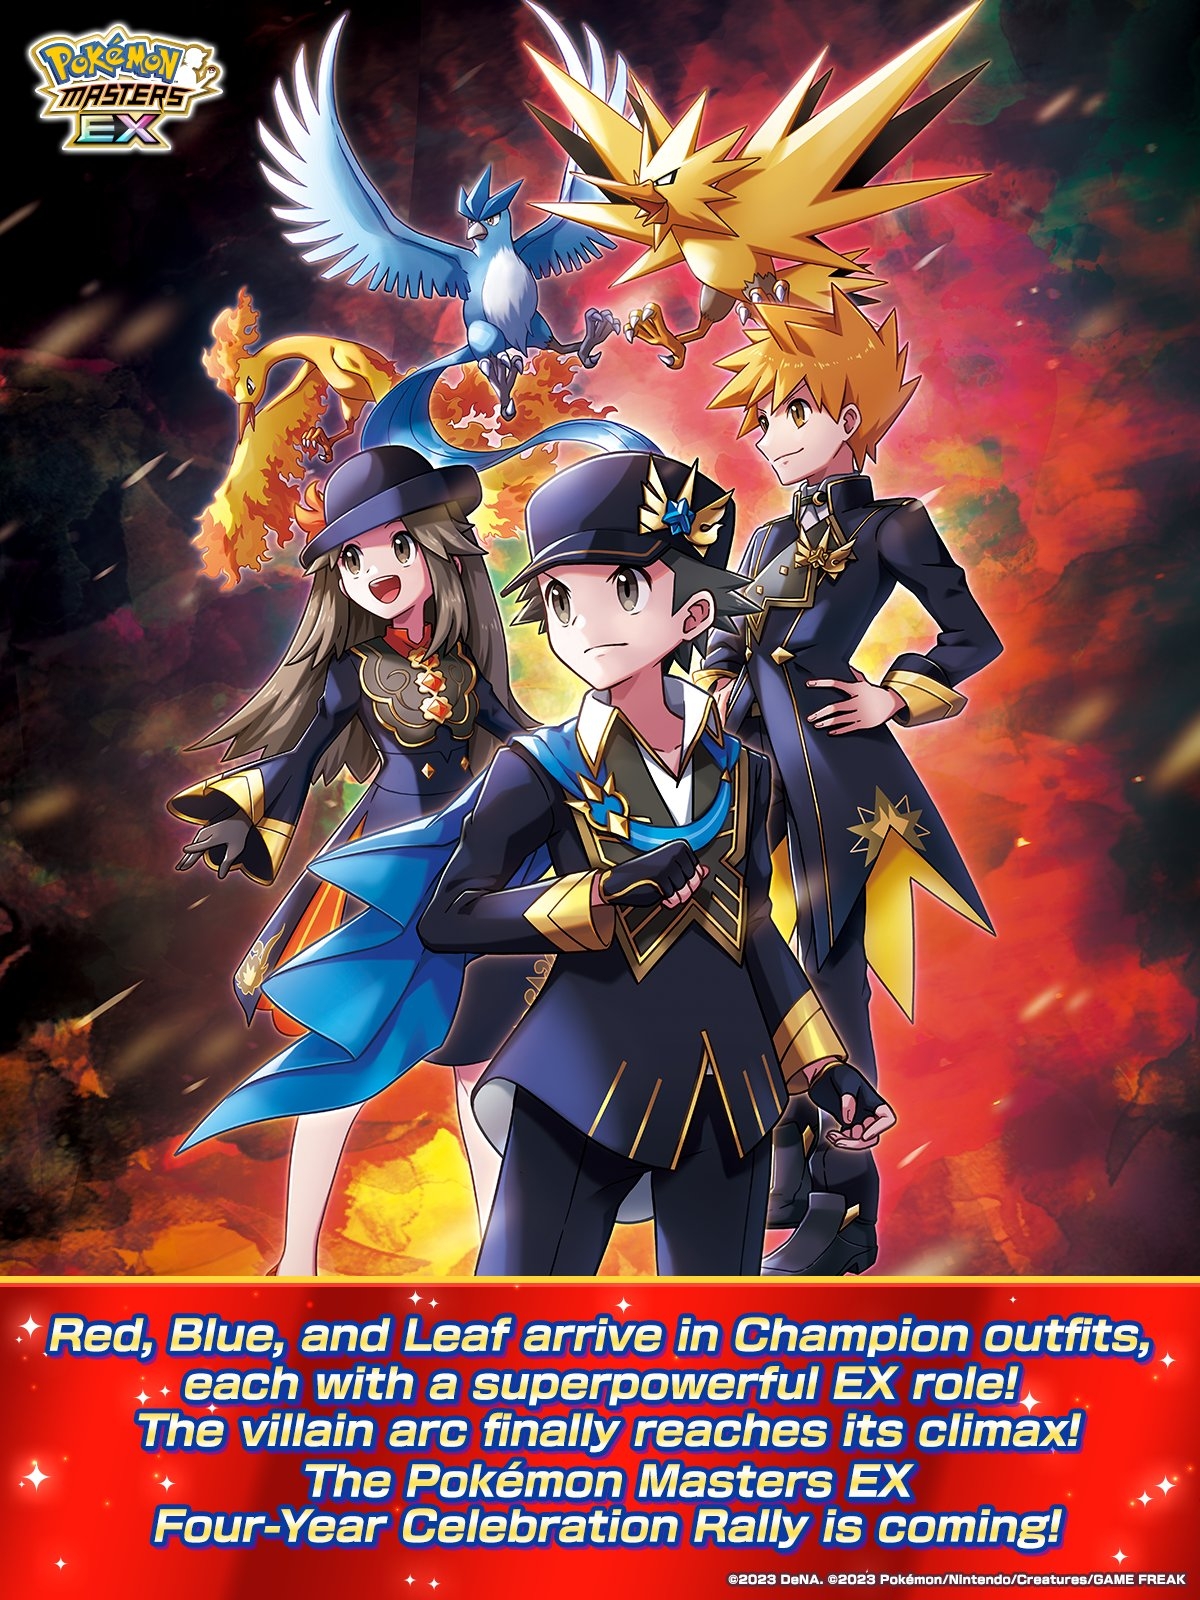 Red, Blue, and Leaf arrive in Champion outfits